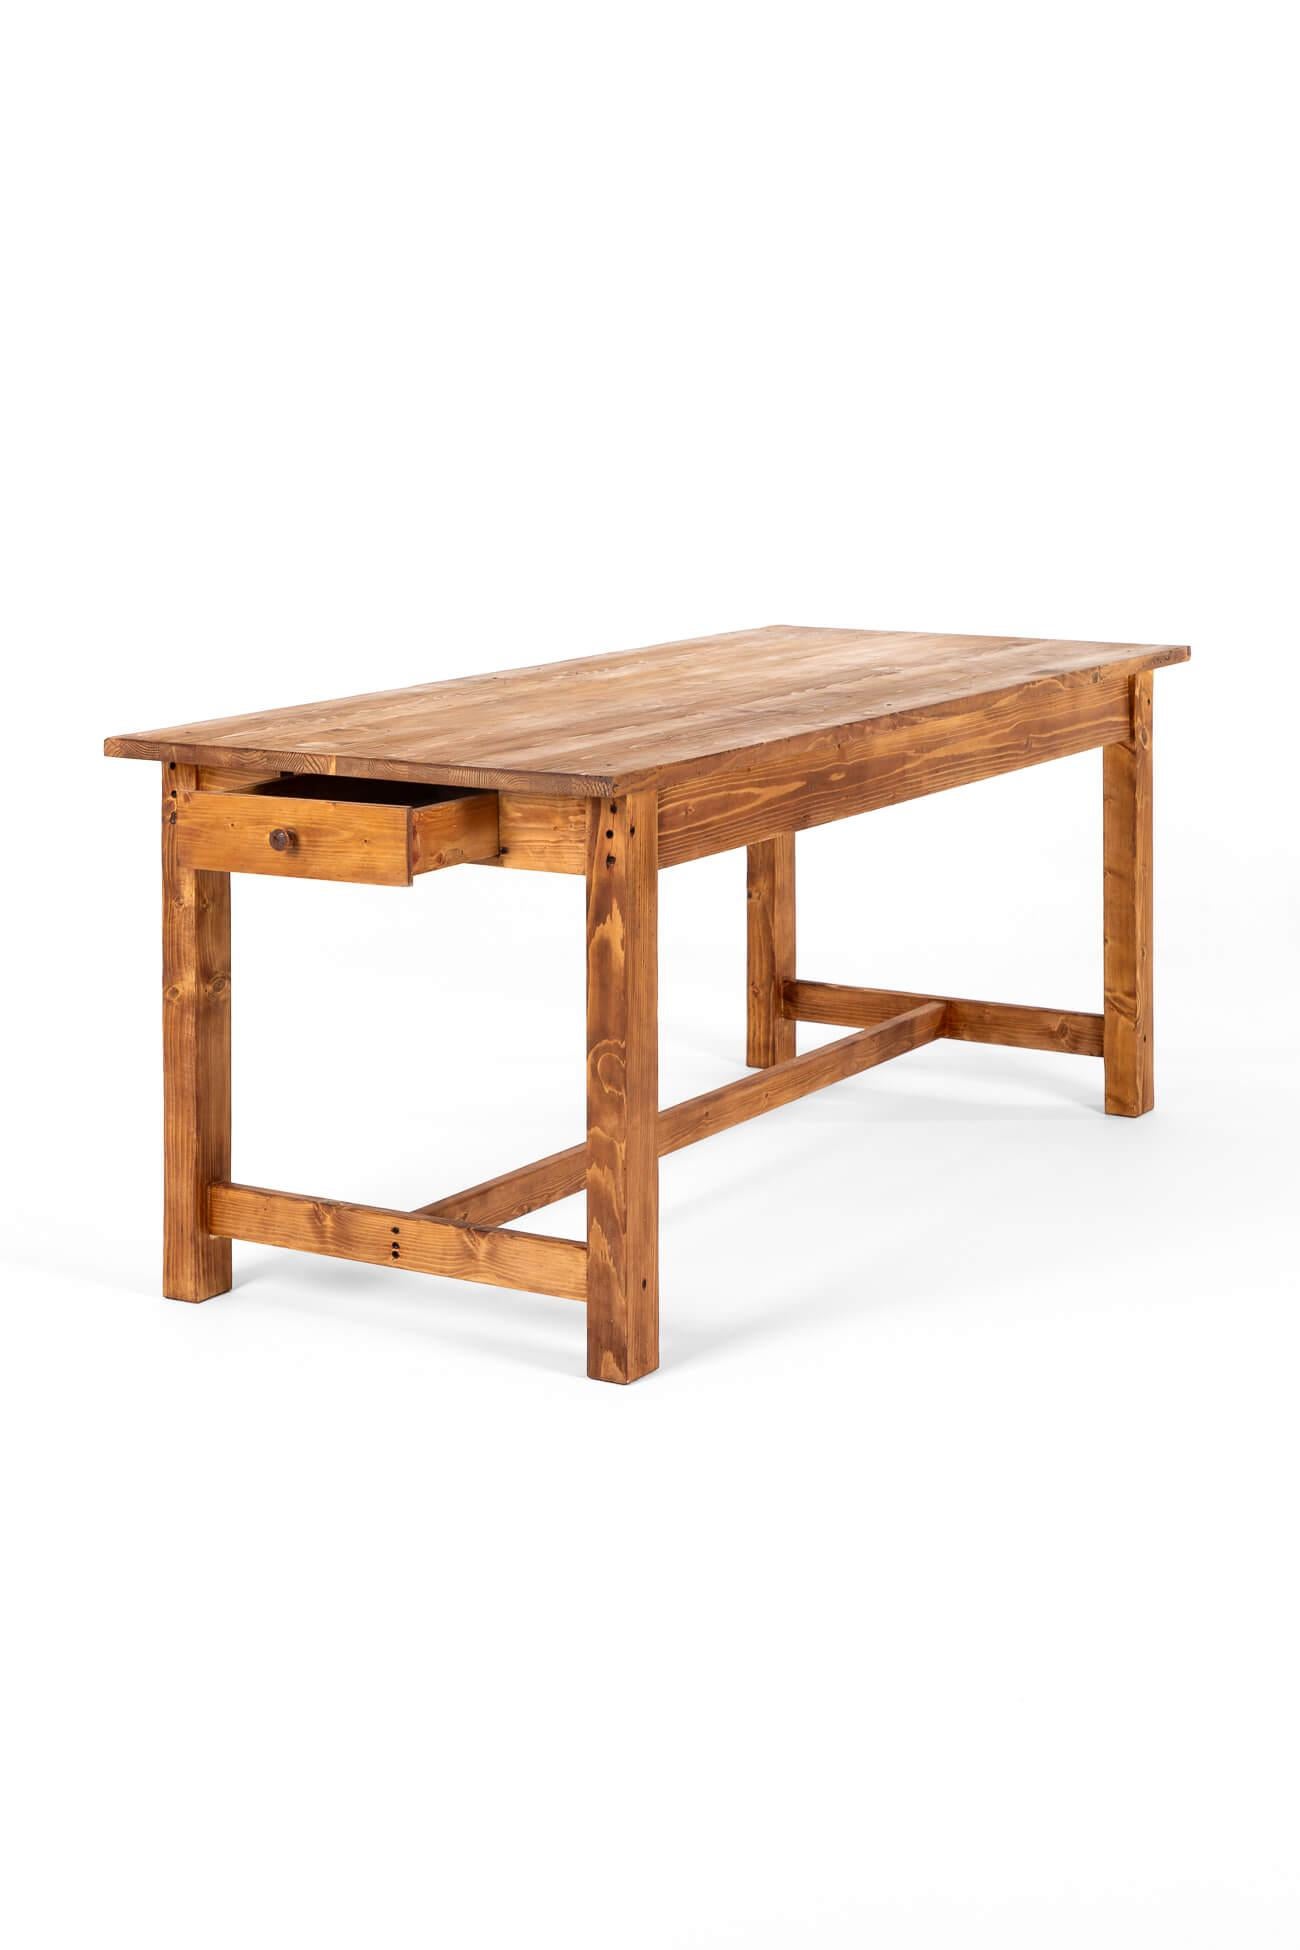 French Provincial Pine Farmhouse Table For Sale